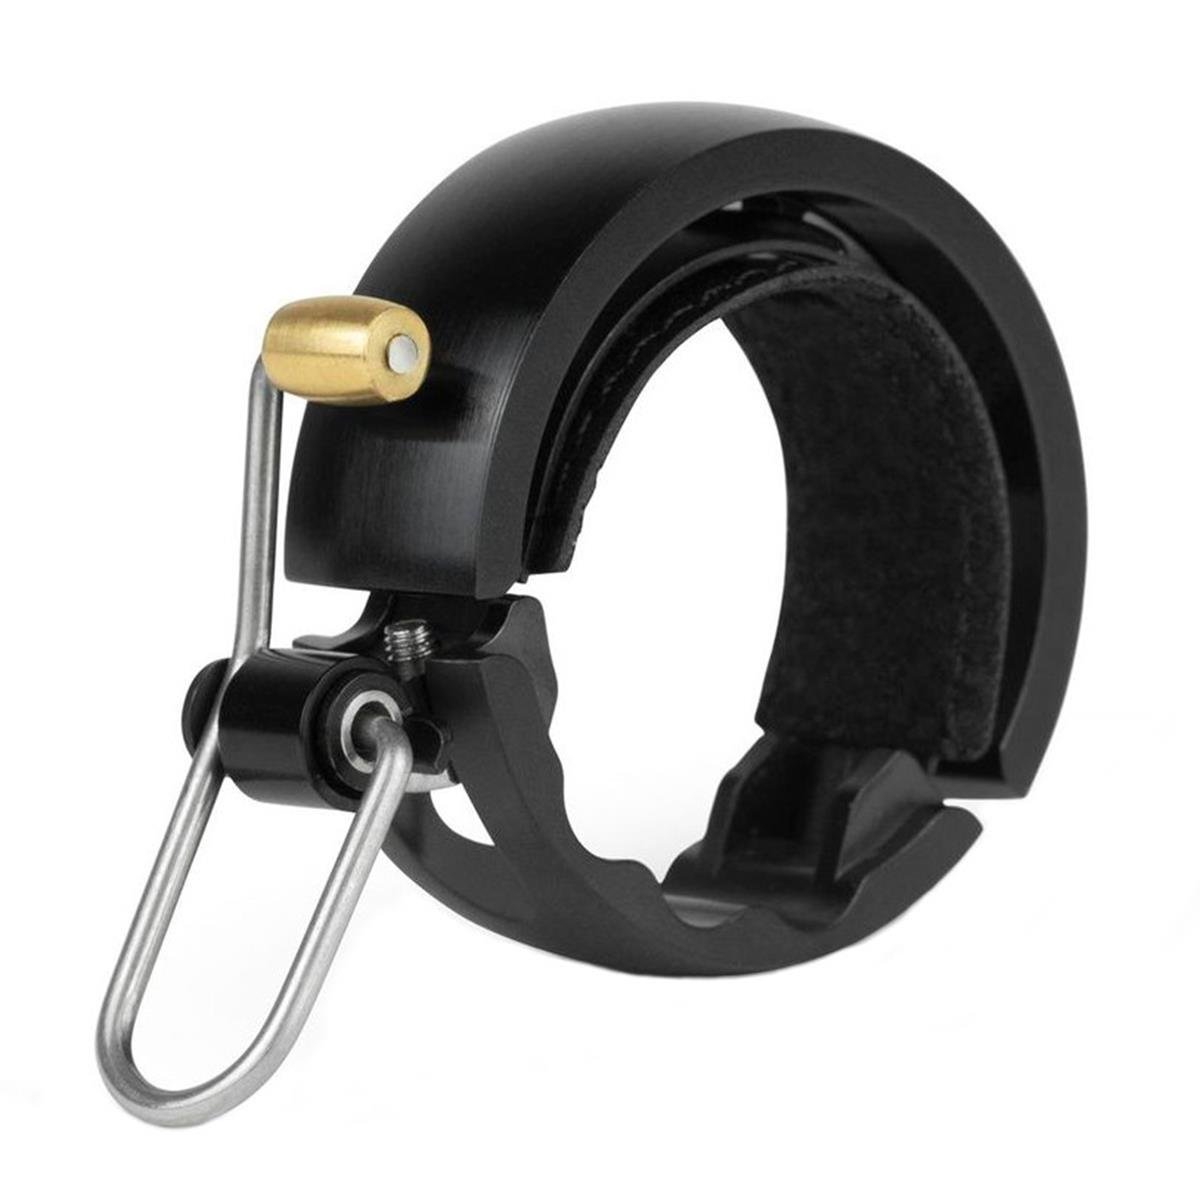 Knog Bike Bell Oi Luxe Black